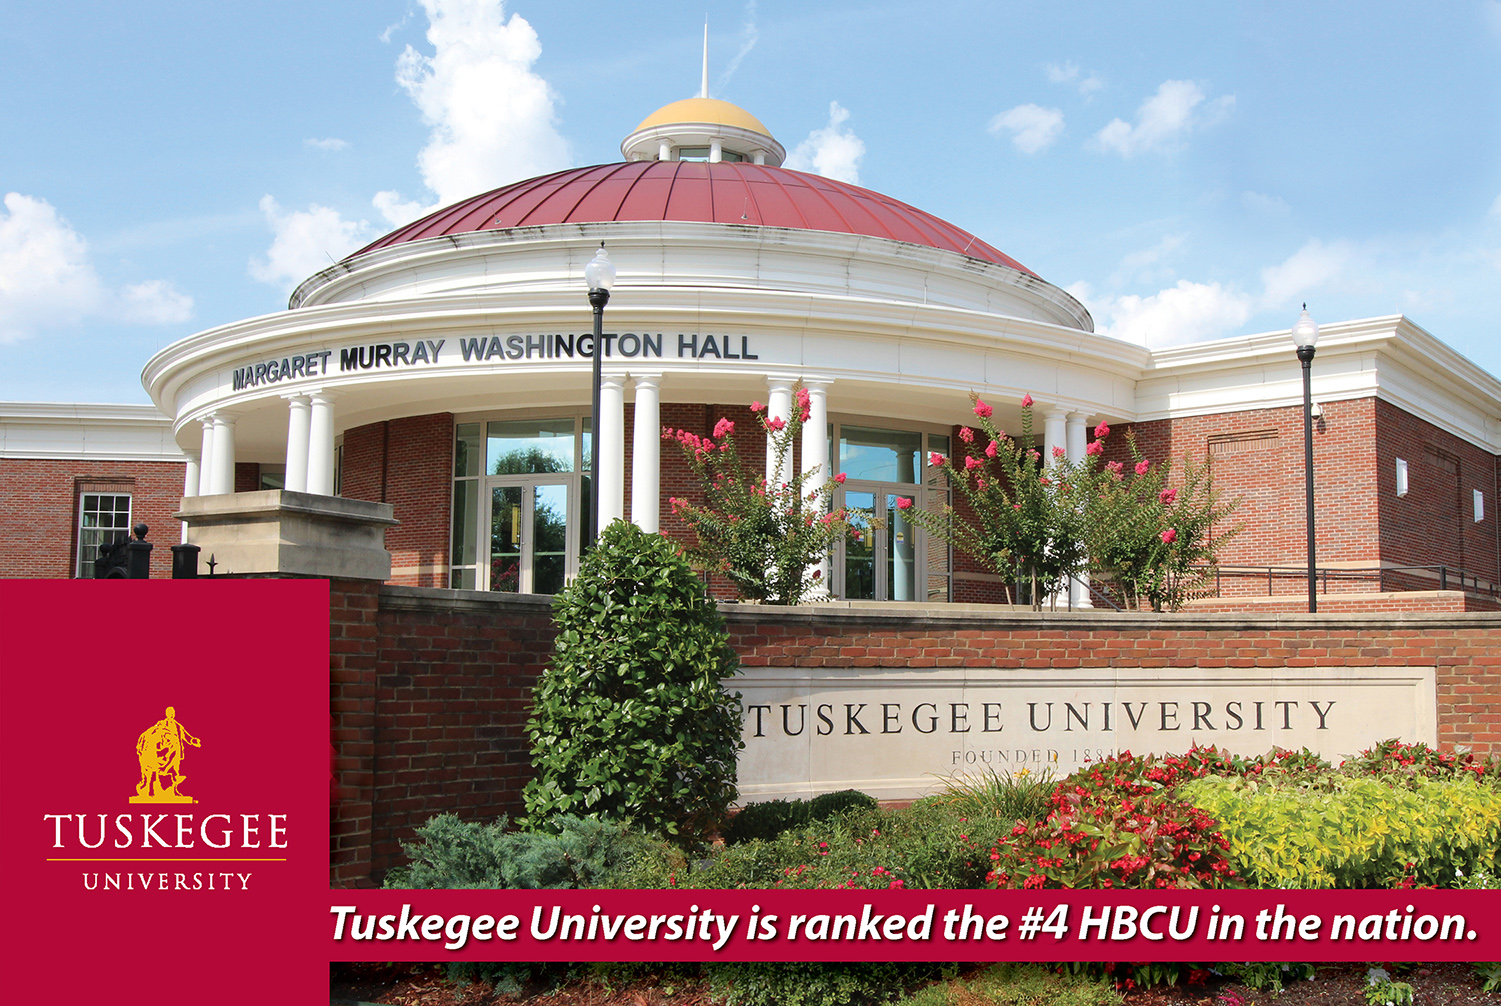 Tuskegee University is ranked number 4 HBCU in the nation graphic